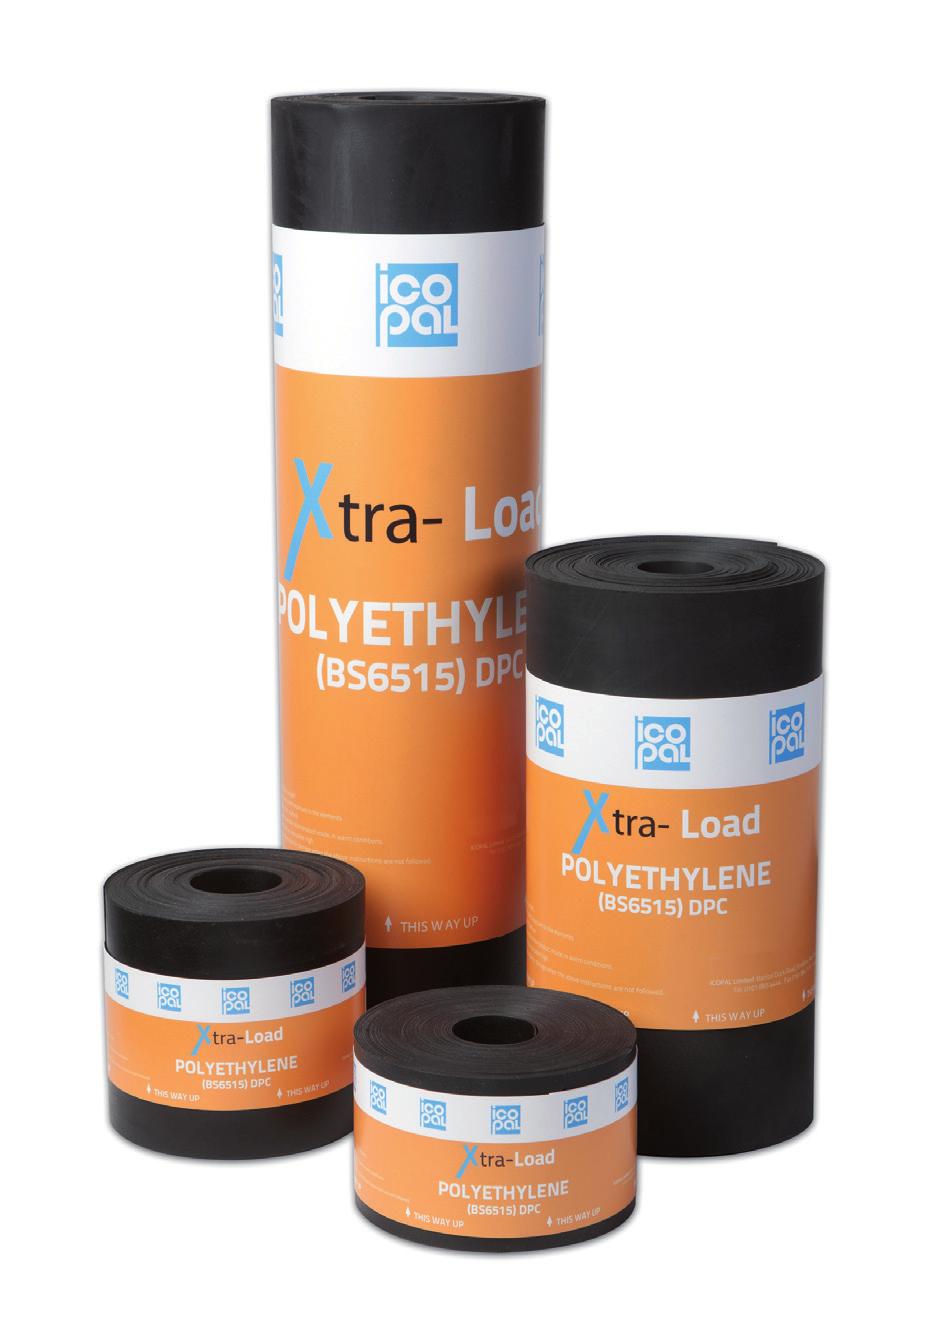 Xtra-Load Polyethylene (BS6515) DPC Xtra-Load Polyethylene DPC consists of a black low density polyethylene sheet complying with the requirements of BS 6515 Xtra-Load Polyethylene DPC At 0.